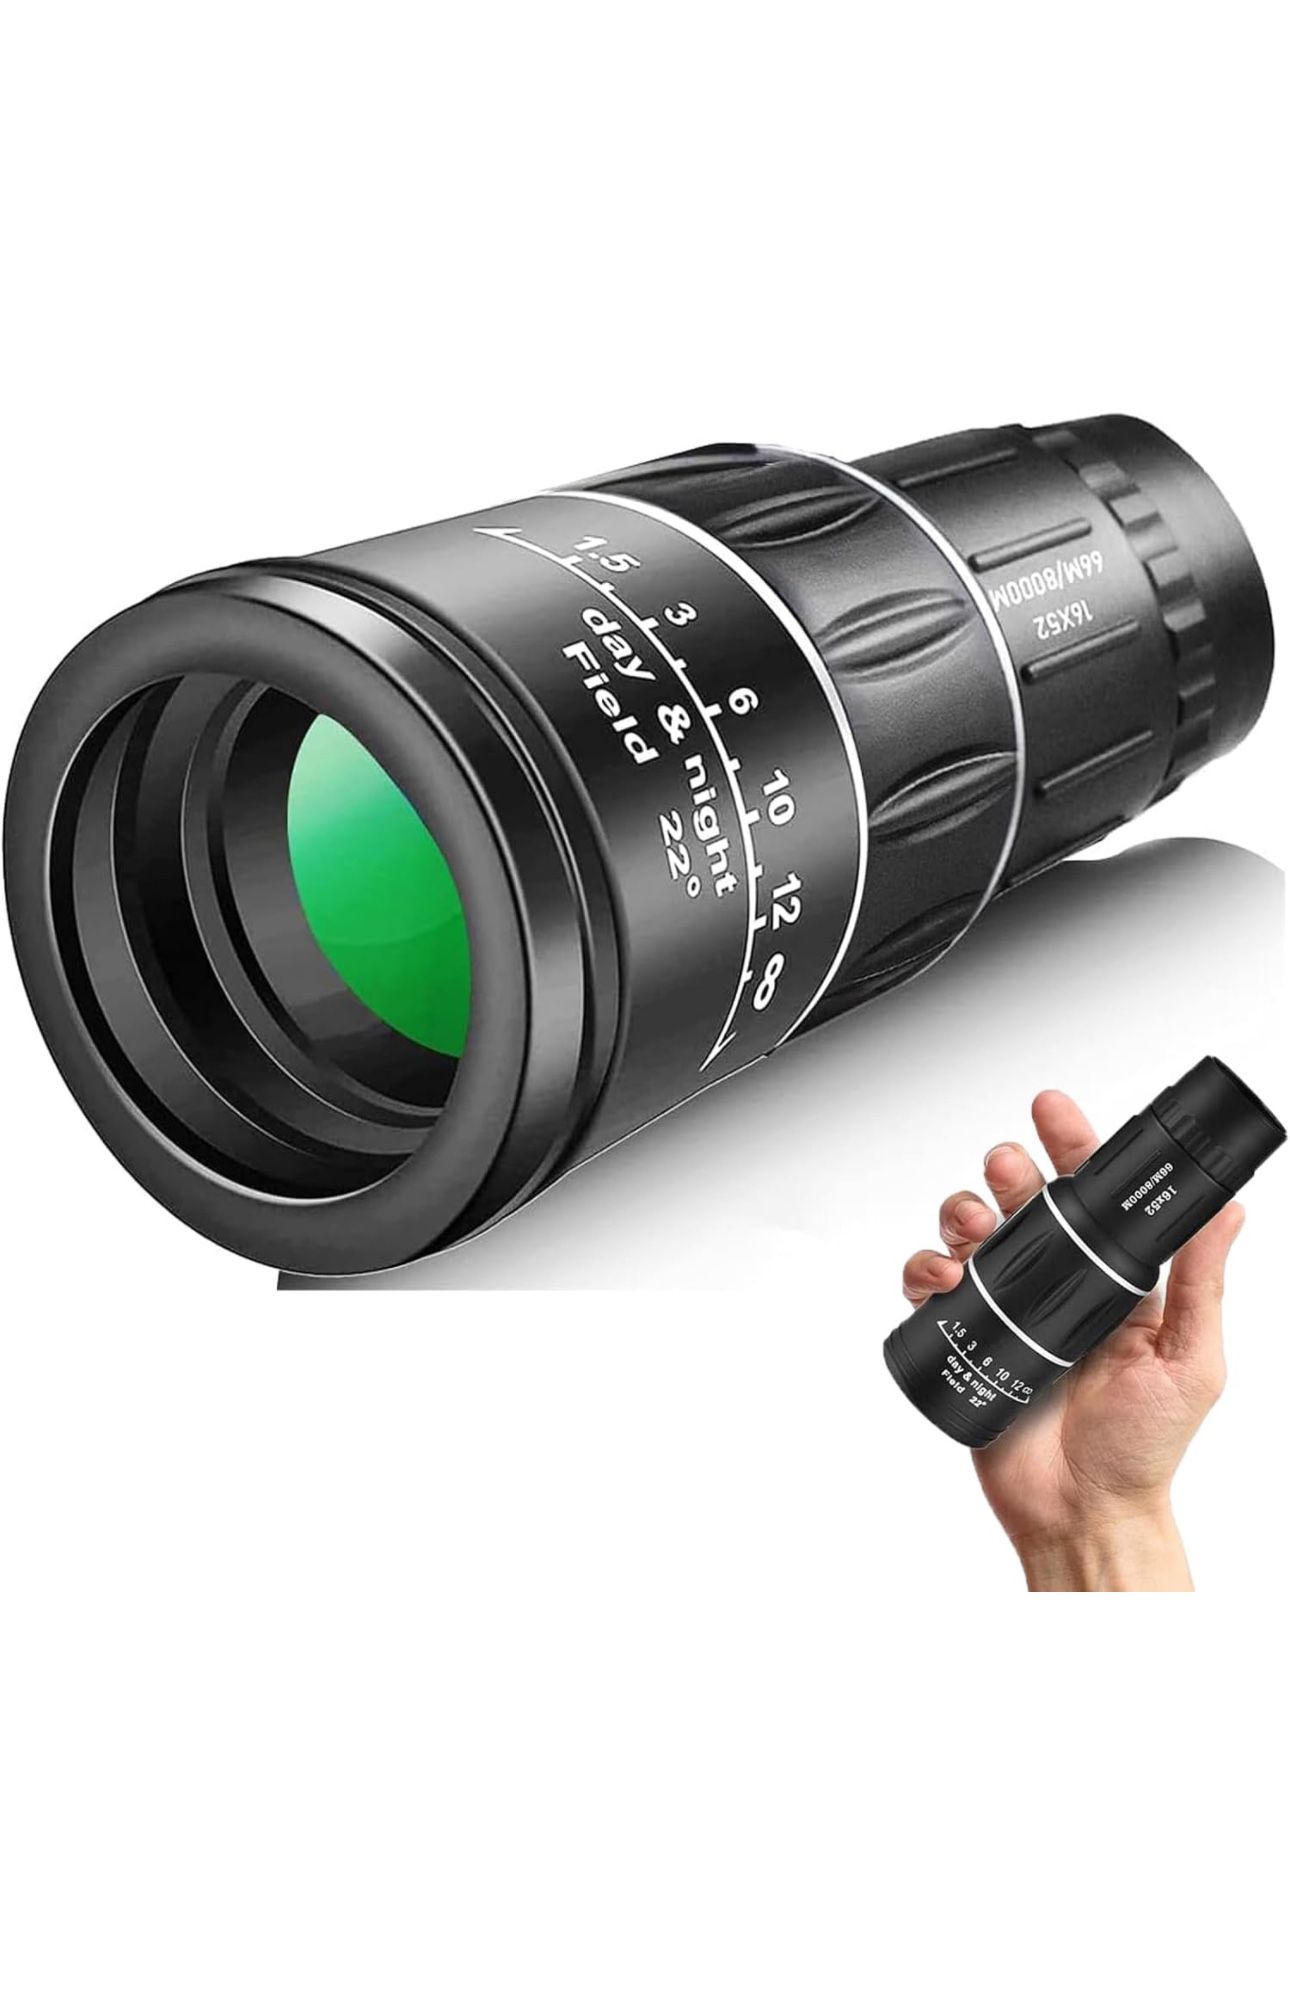 16X52 Mini Monocular Telescope High Powered for Adults, Birthday Gifts for Men Dad Him Husband Teen Boys, BAK4 & FMC Prism Scope for Birdwatching Outd